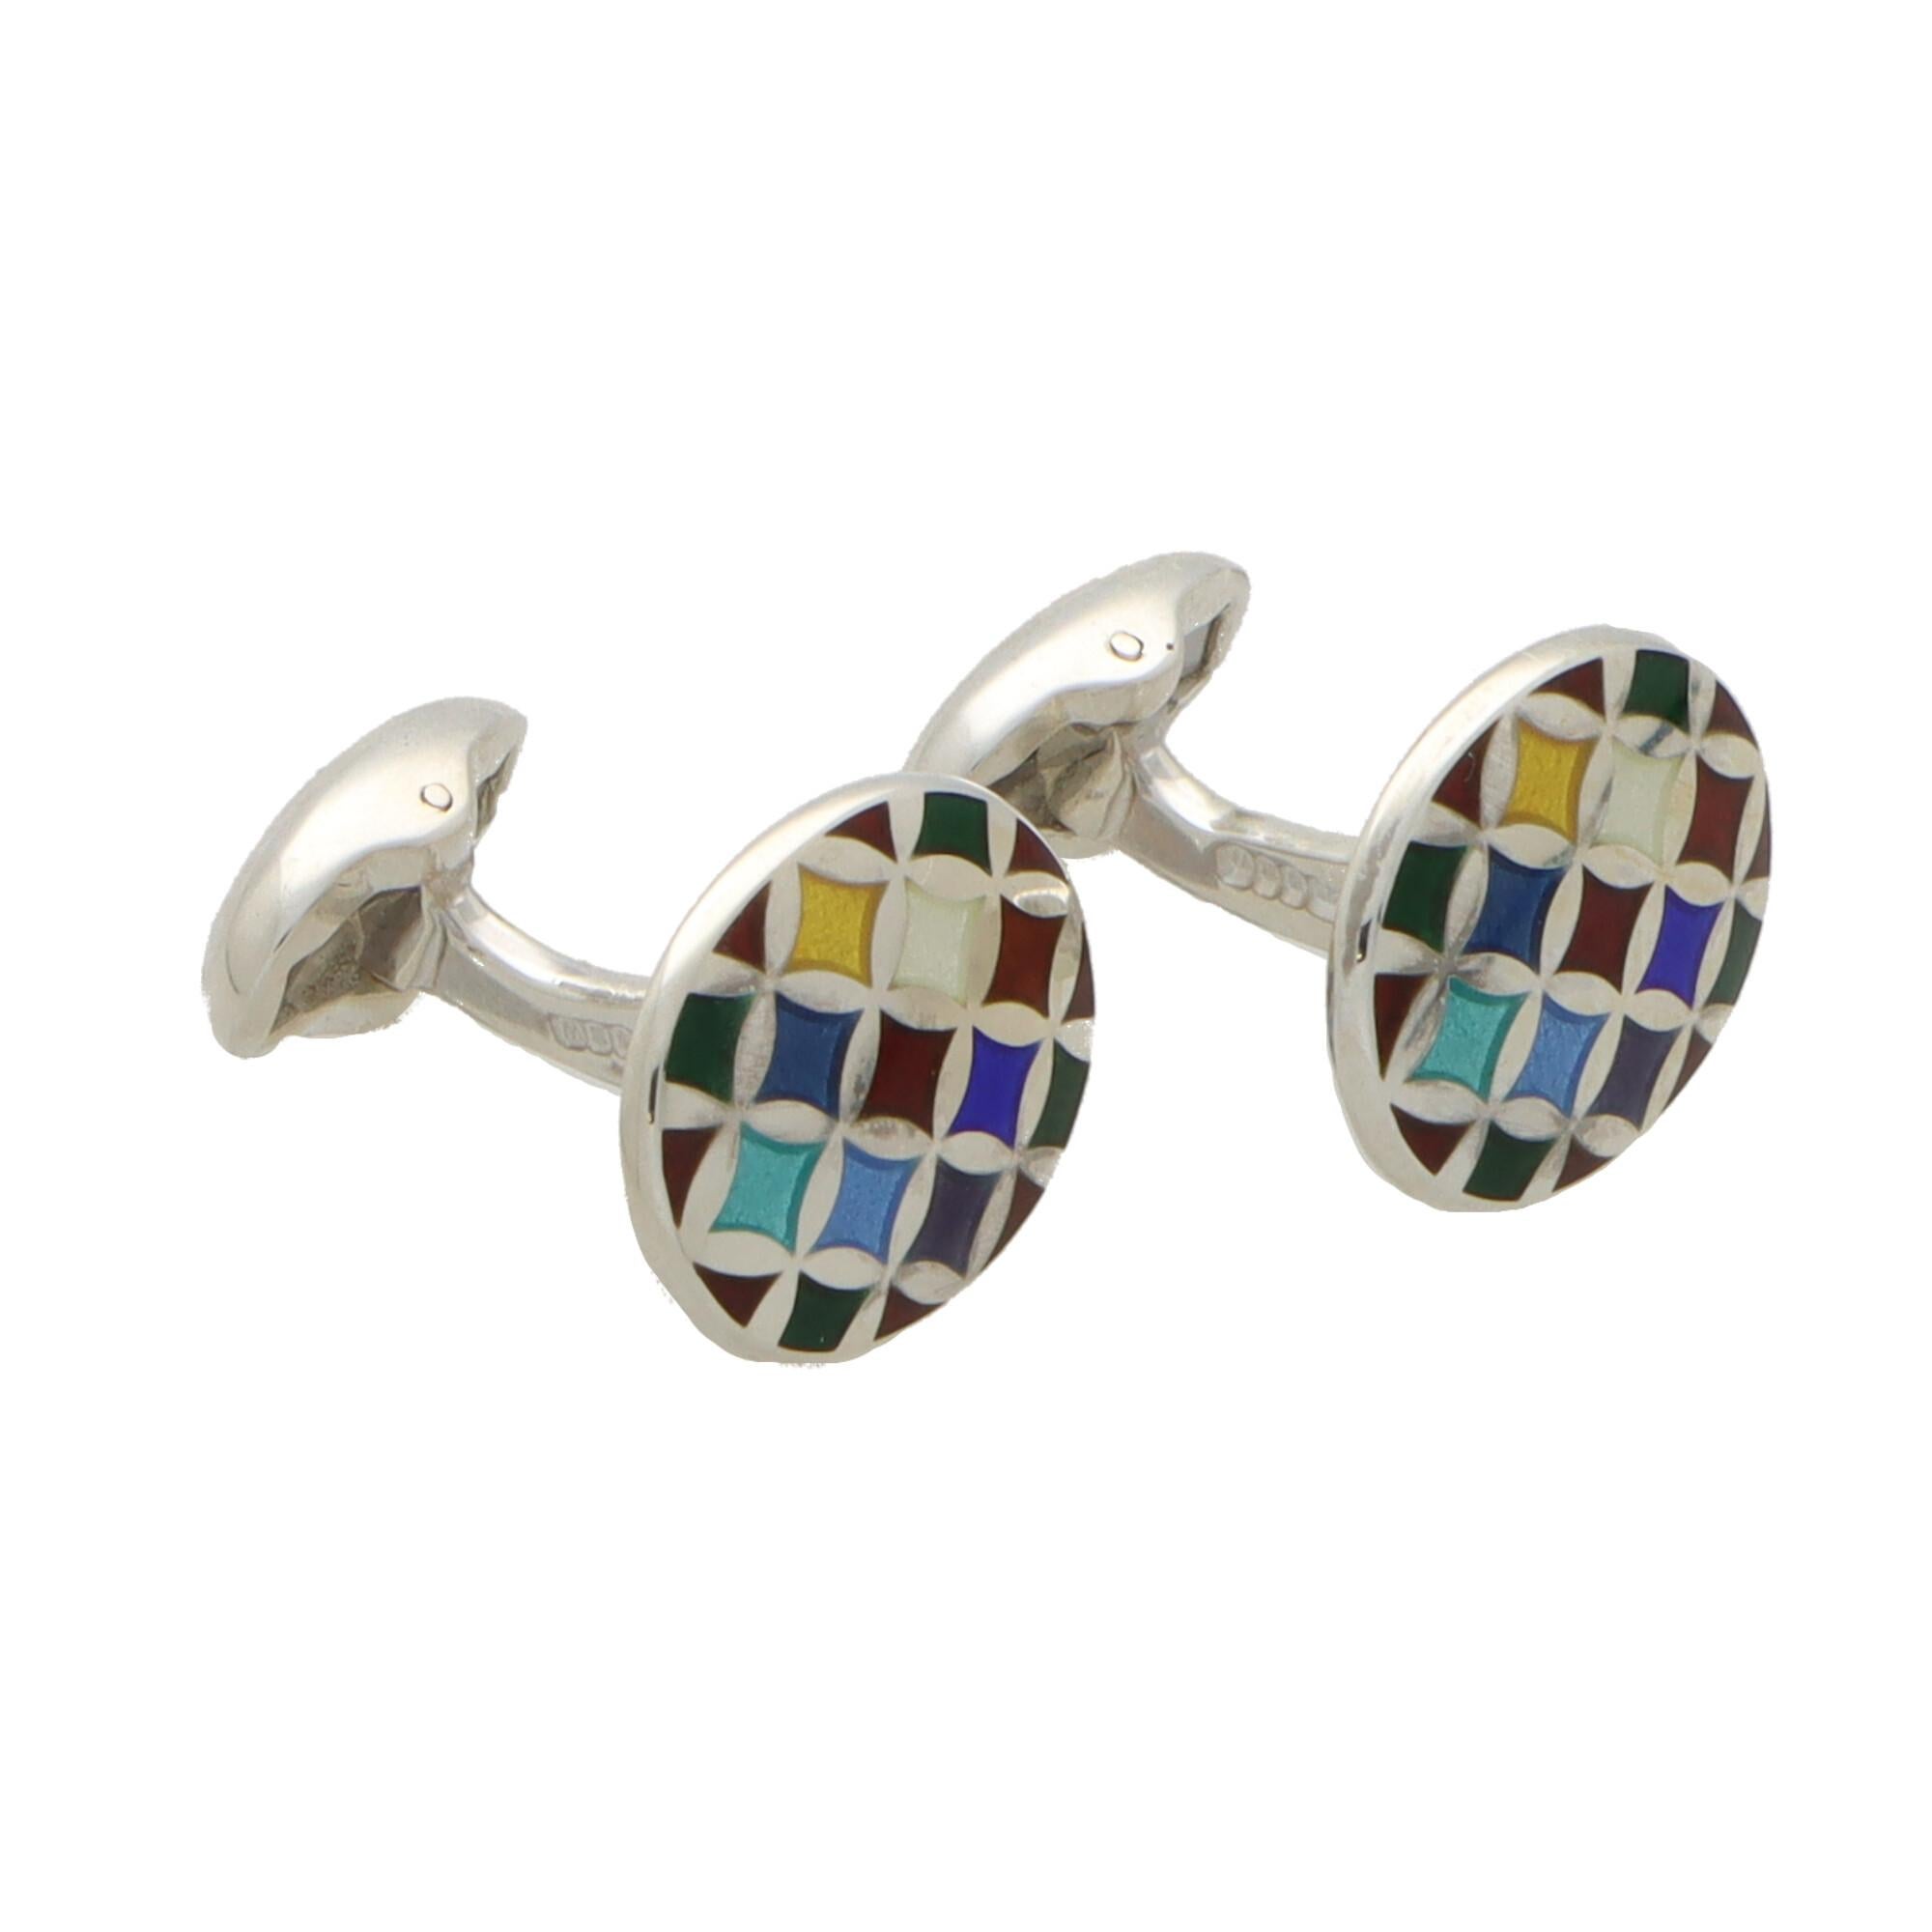 Multi-Coloured Harlequin Style Swivel Back Cufflinks in British Sterling Silver In New Condition For Sale In London, GB